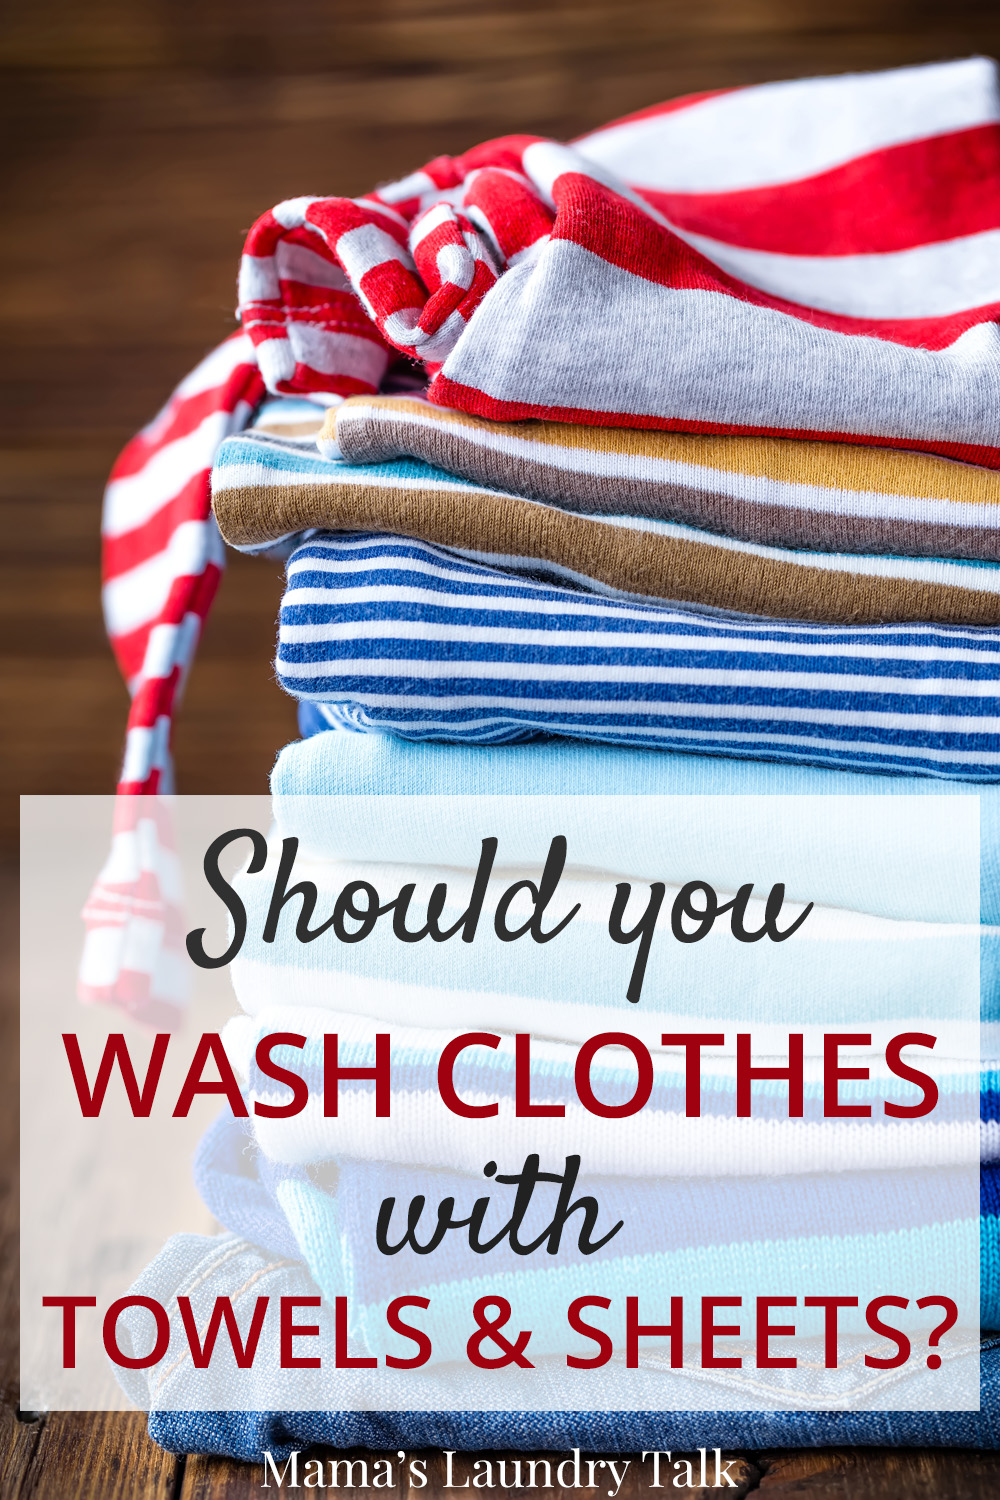 Should you wash clothes with towels and sheets?